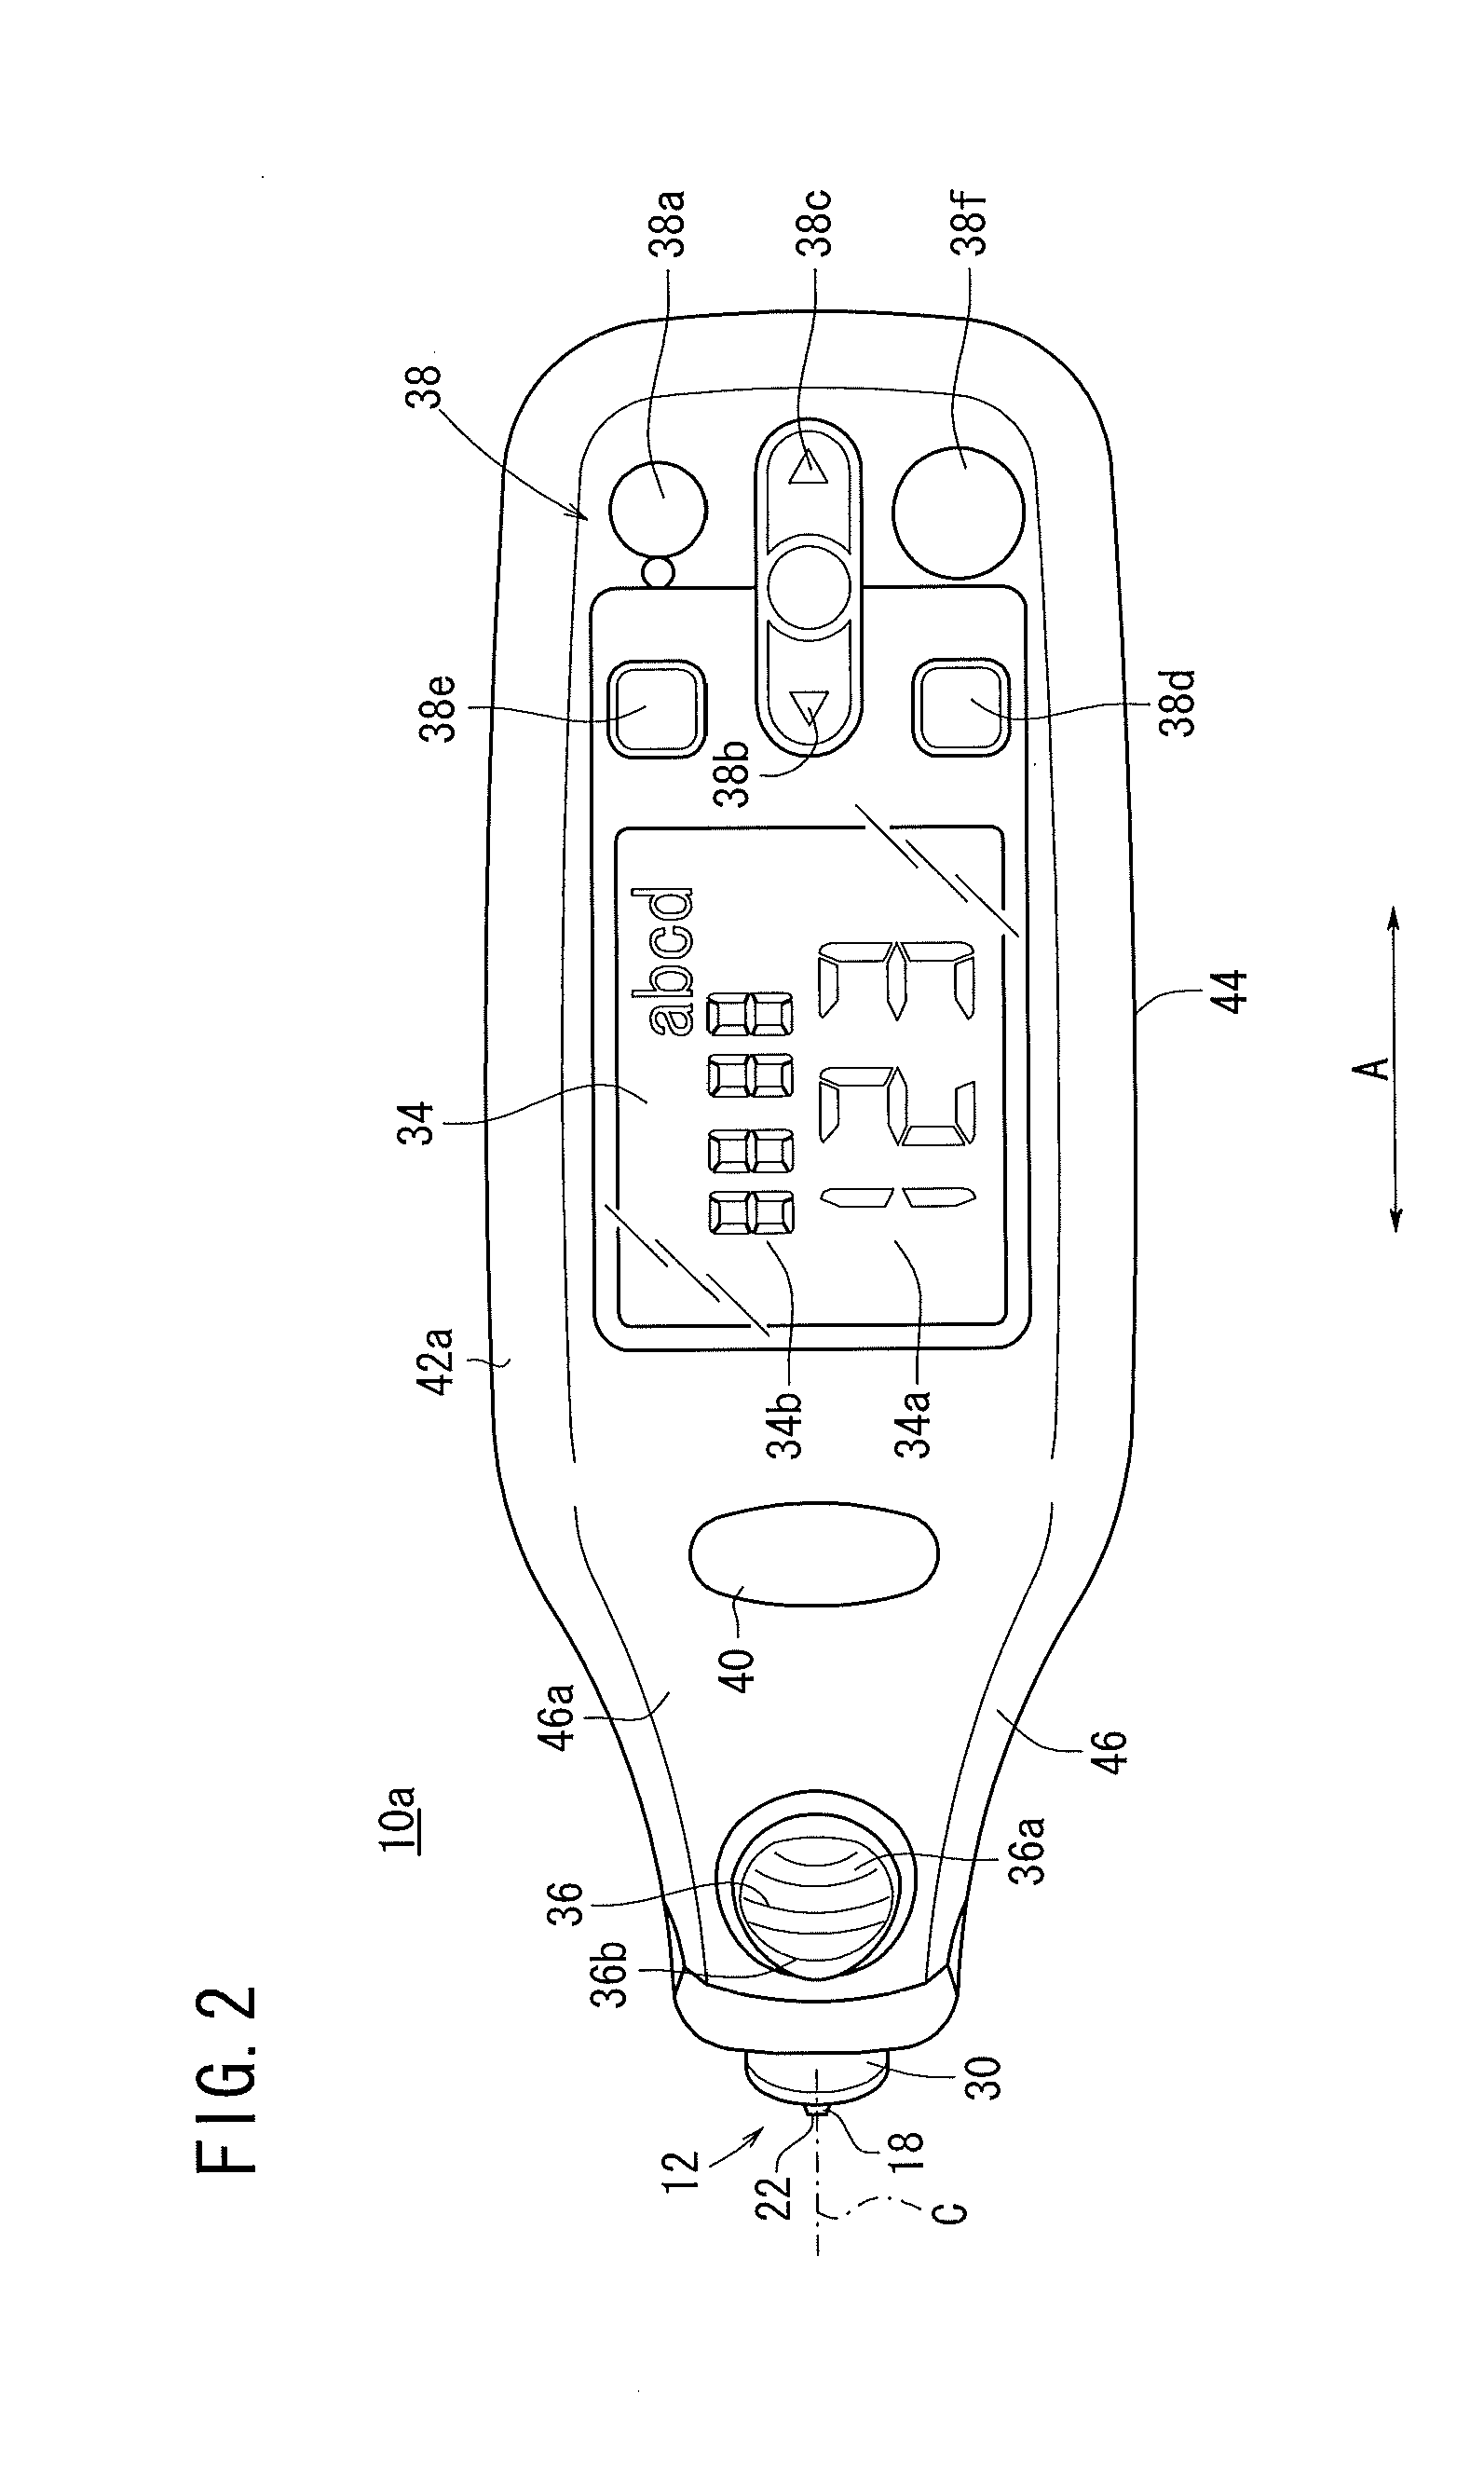 Device for measuring blood component